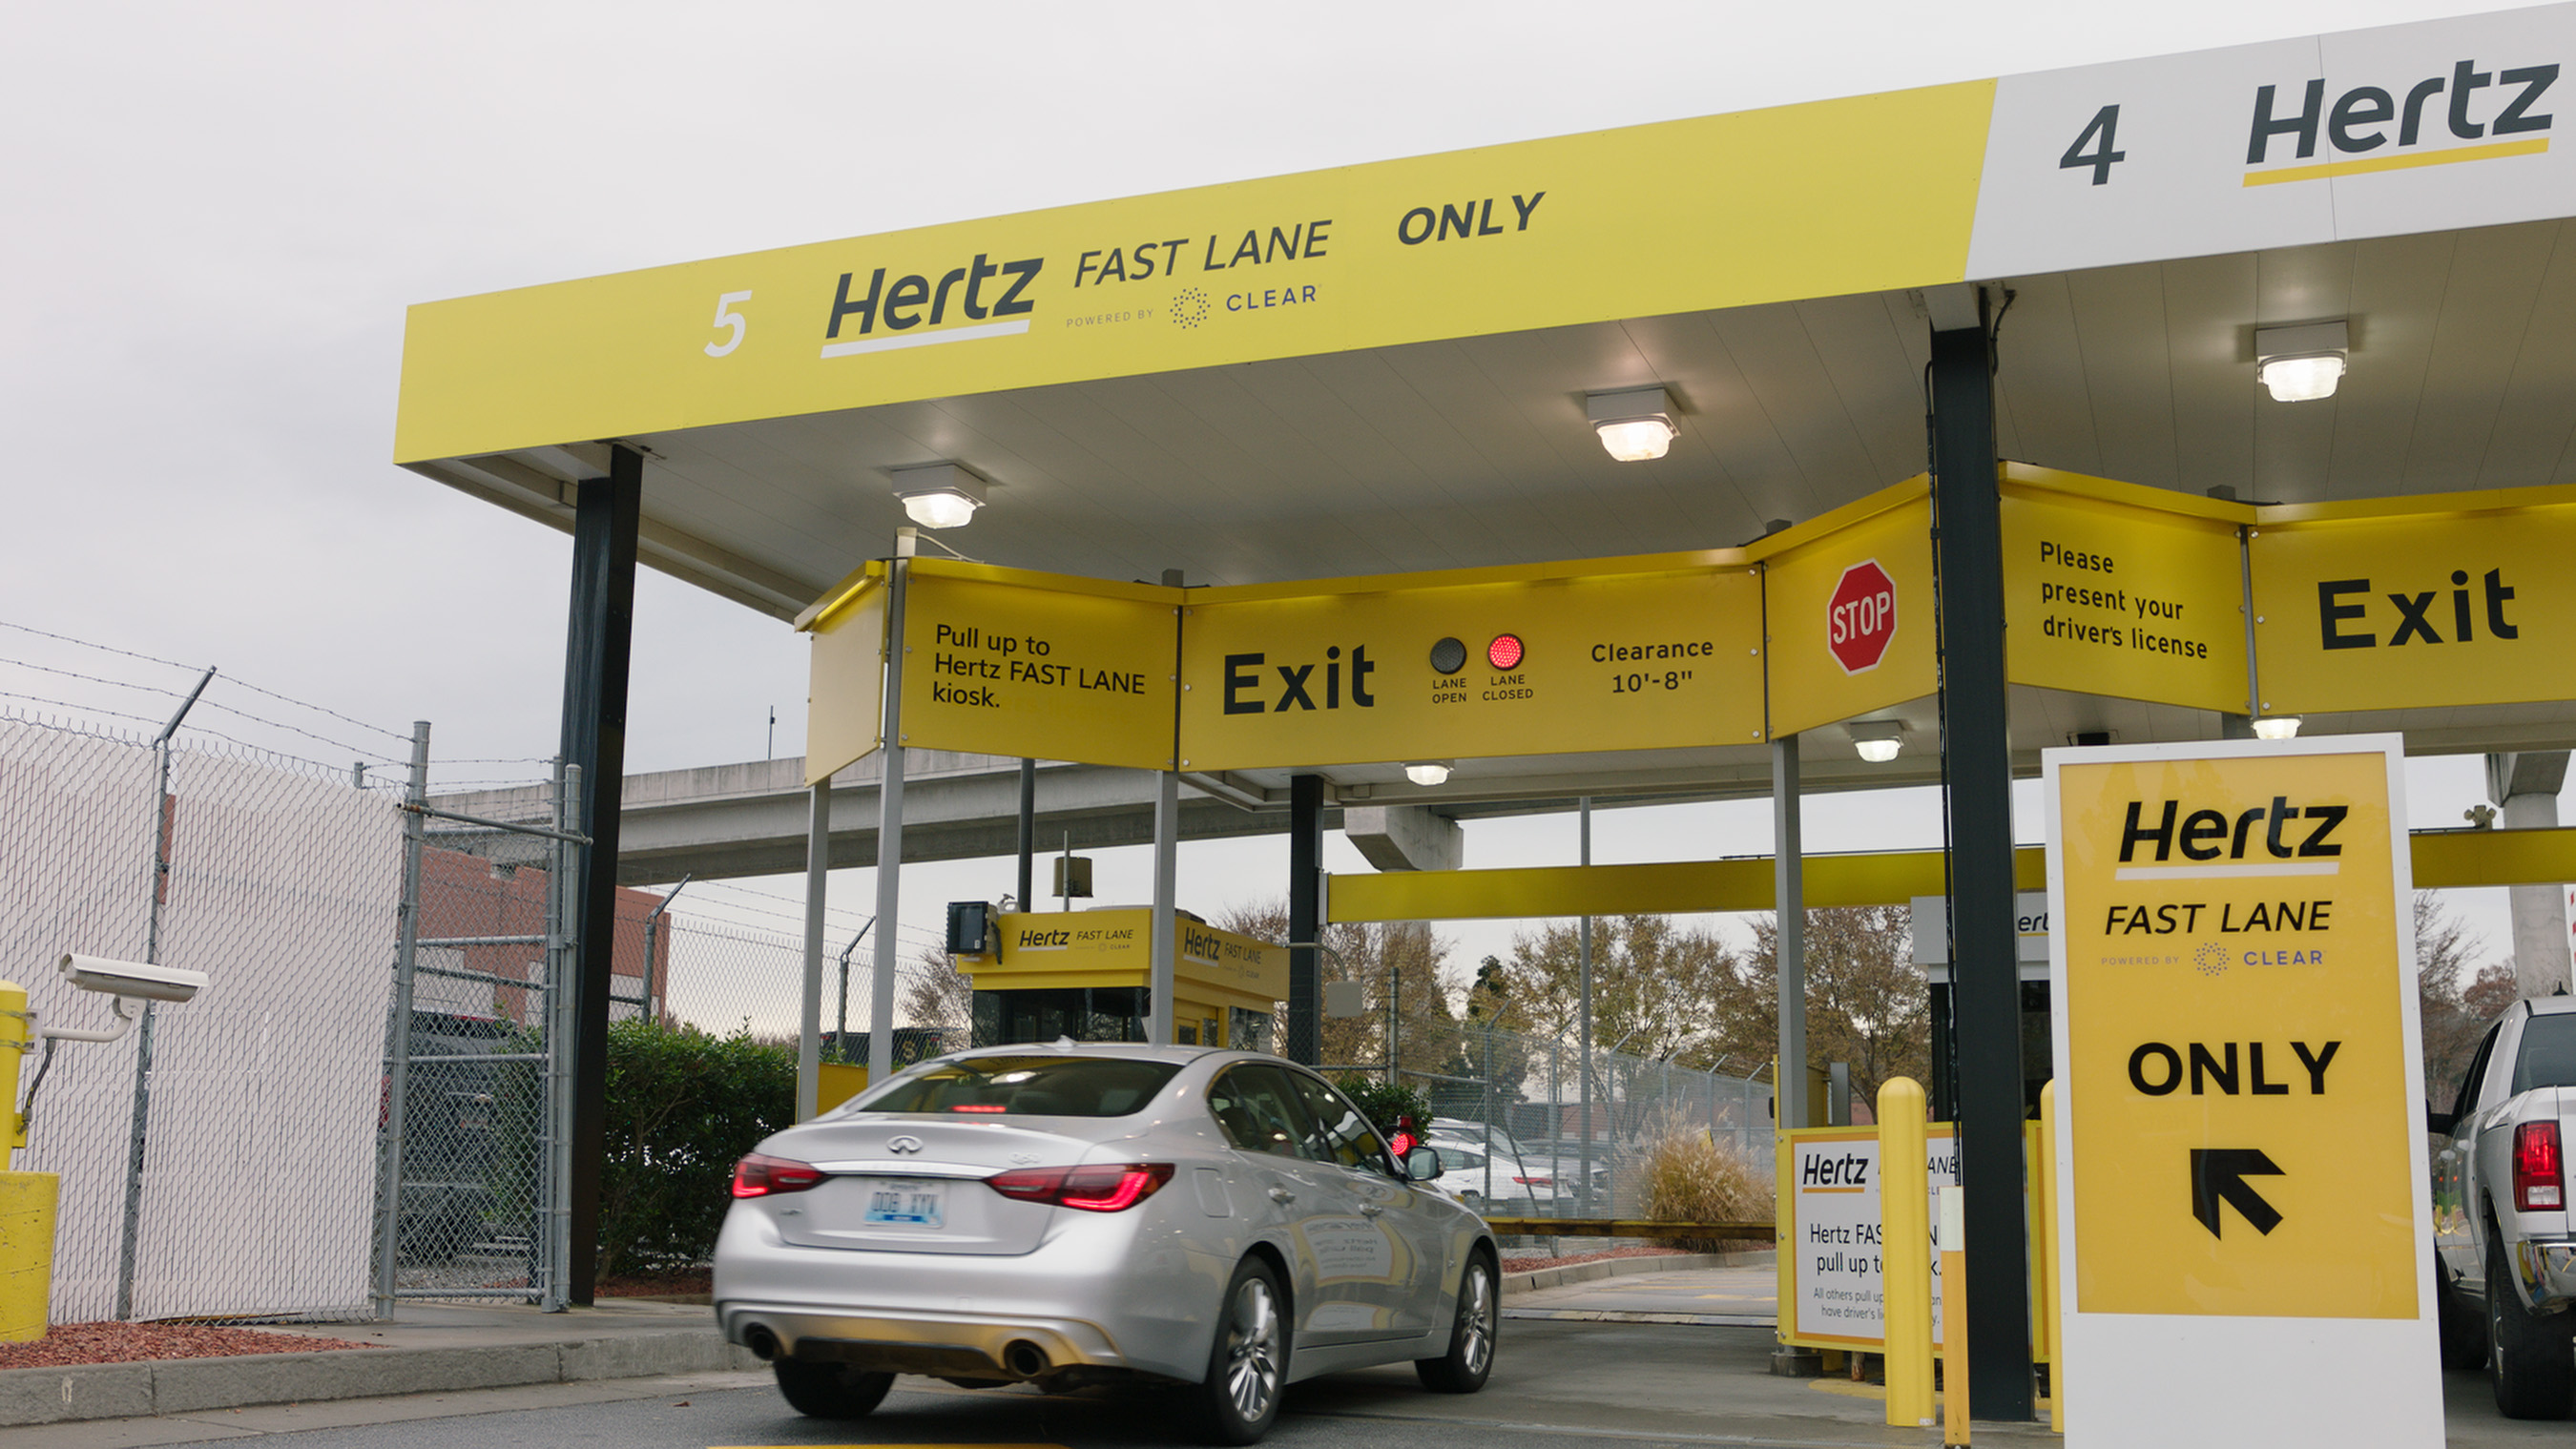 On Tuesday, Dec. 11, 2018 Hertz and CLEAR announced the Hertz Fast Lane powered by CLEAR, a new service that uses biometrics, allowing travelers to get through the exit gate and on the road in 30 seconds or less with just a look or tap of their finger. It is now available at the Hartsfield-Jackson Atlanta International Airport (ATL), with 40 more locations expected in 2019.